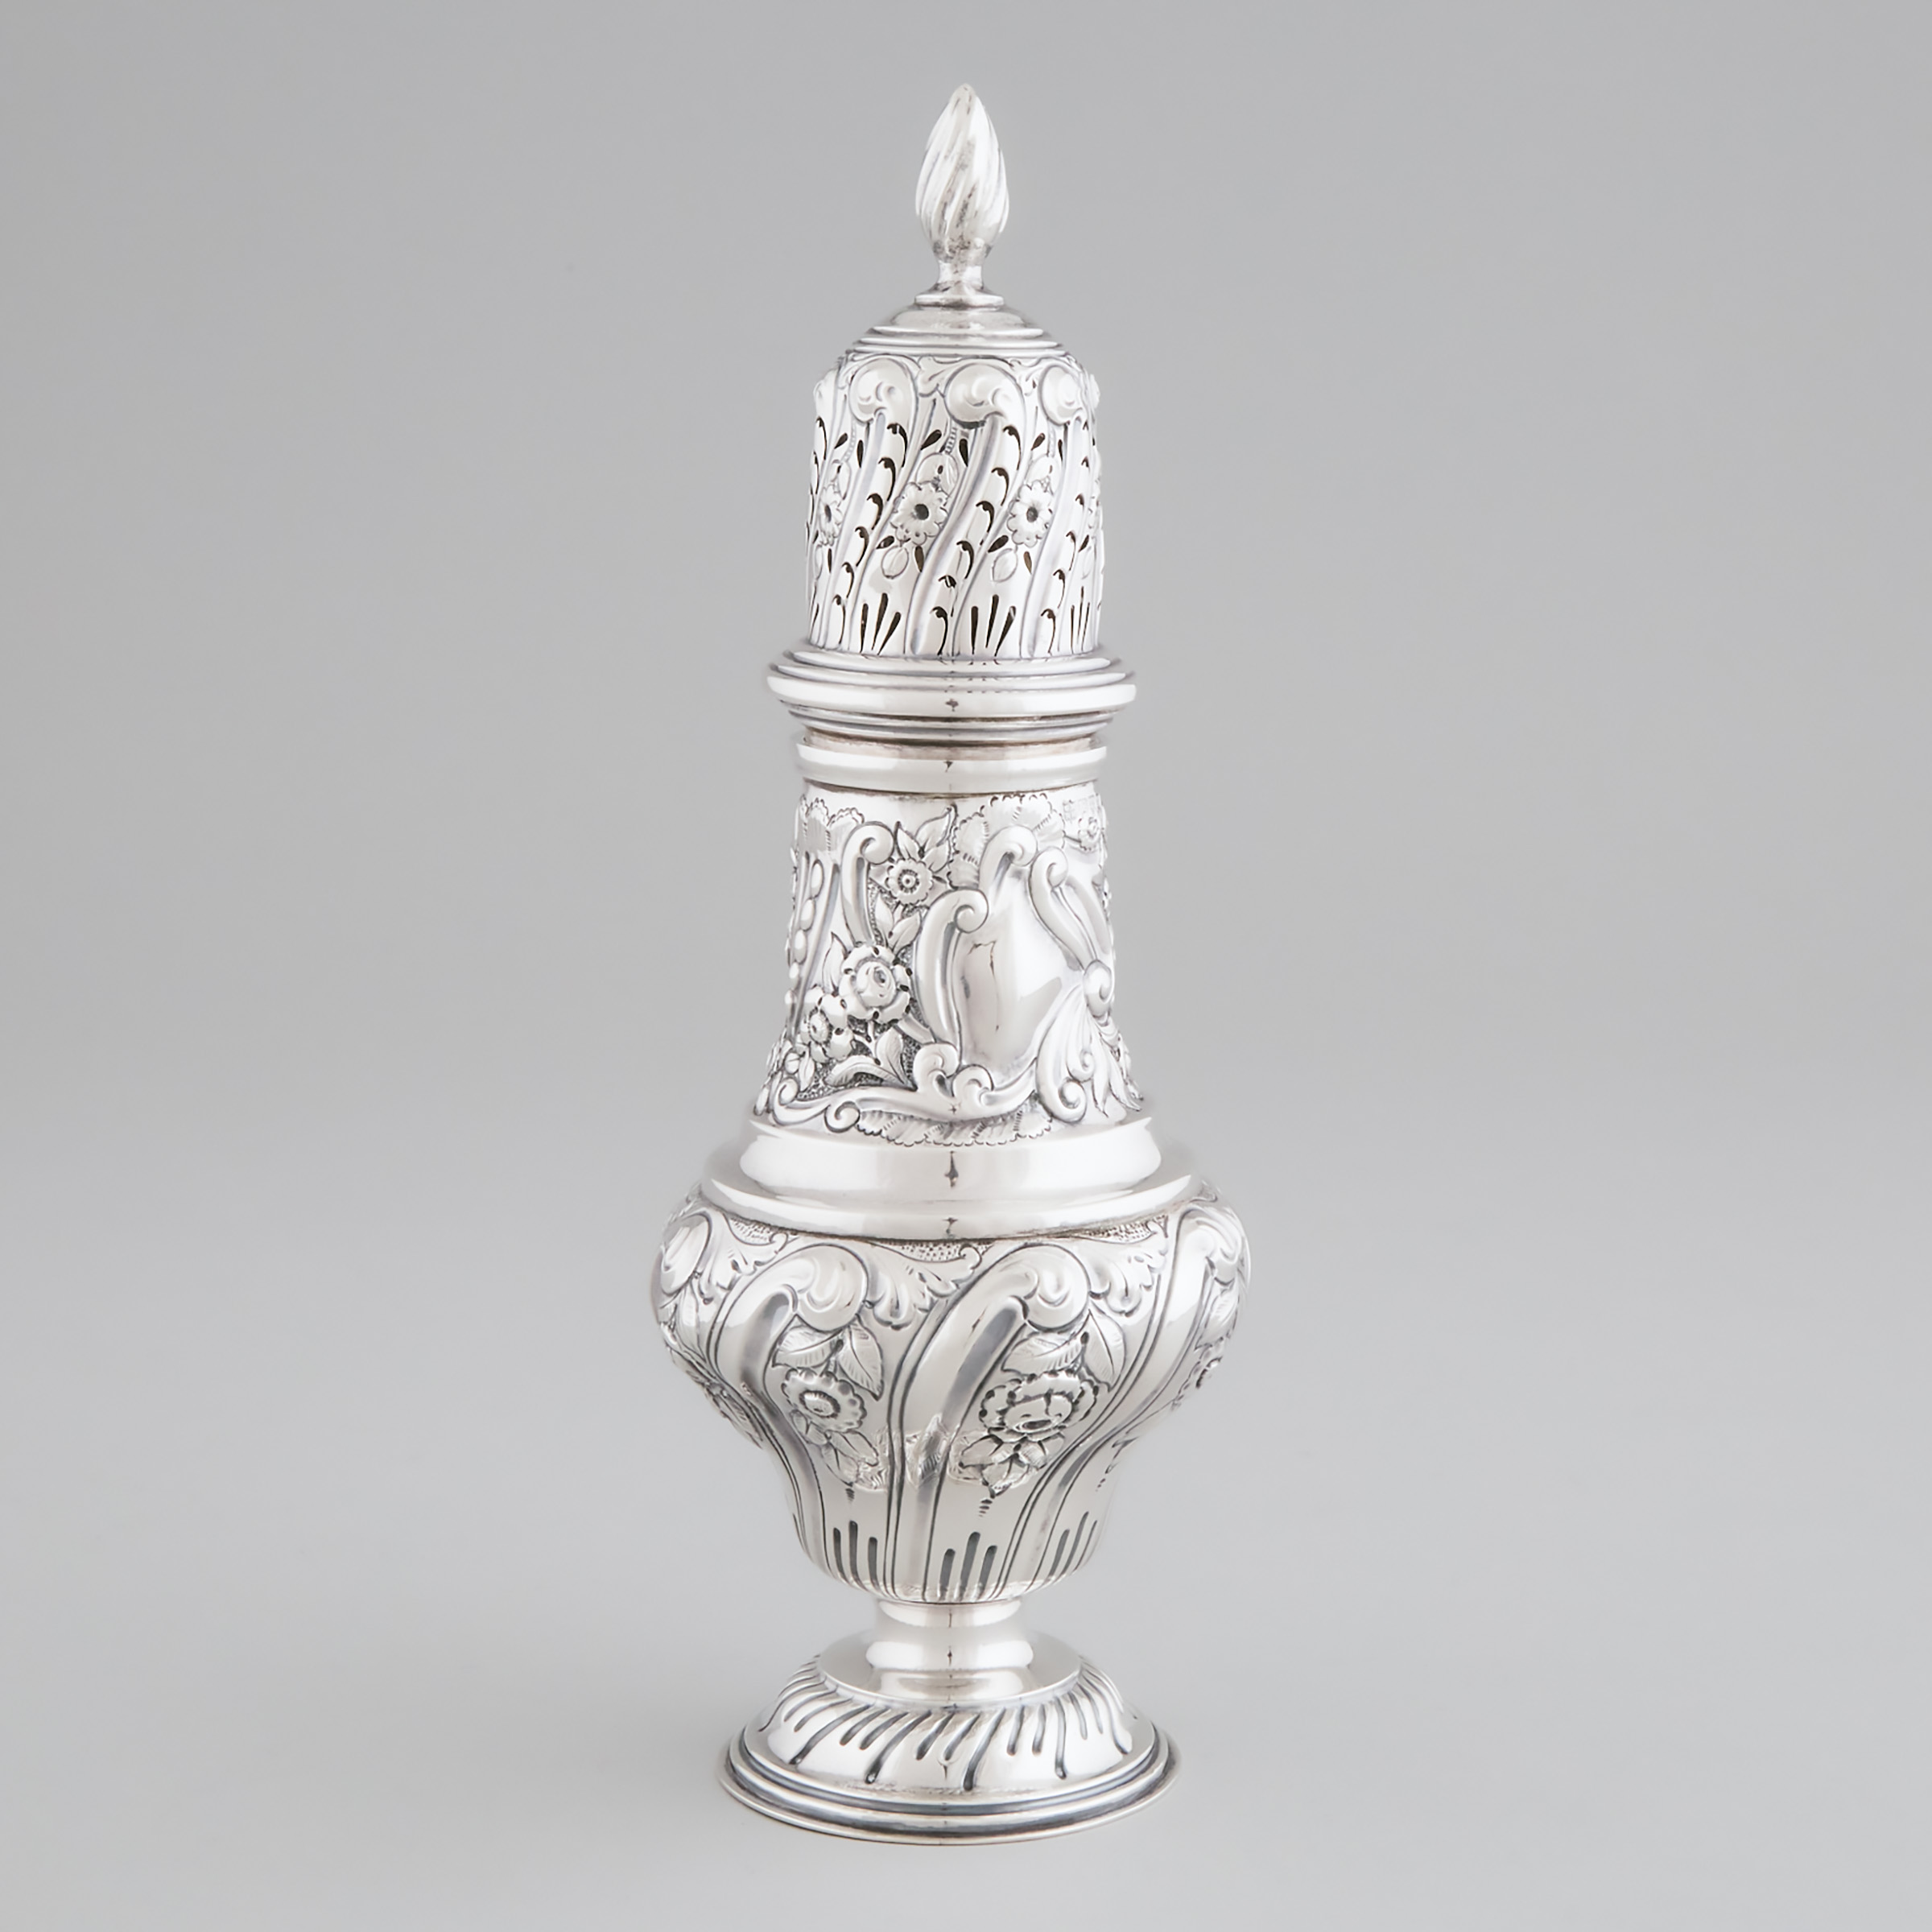 Large Edwardian Silver Baluster Sugar Caster, George Nathan & Ridley Hayes, Chester, 1906